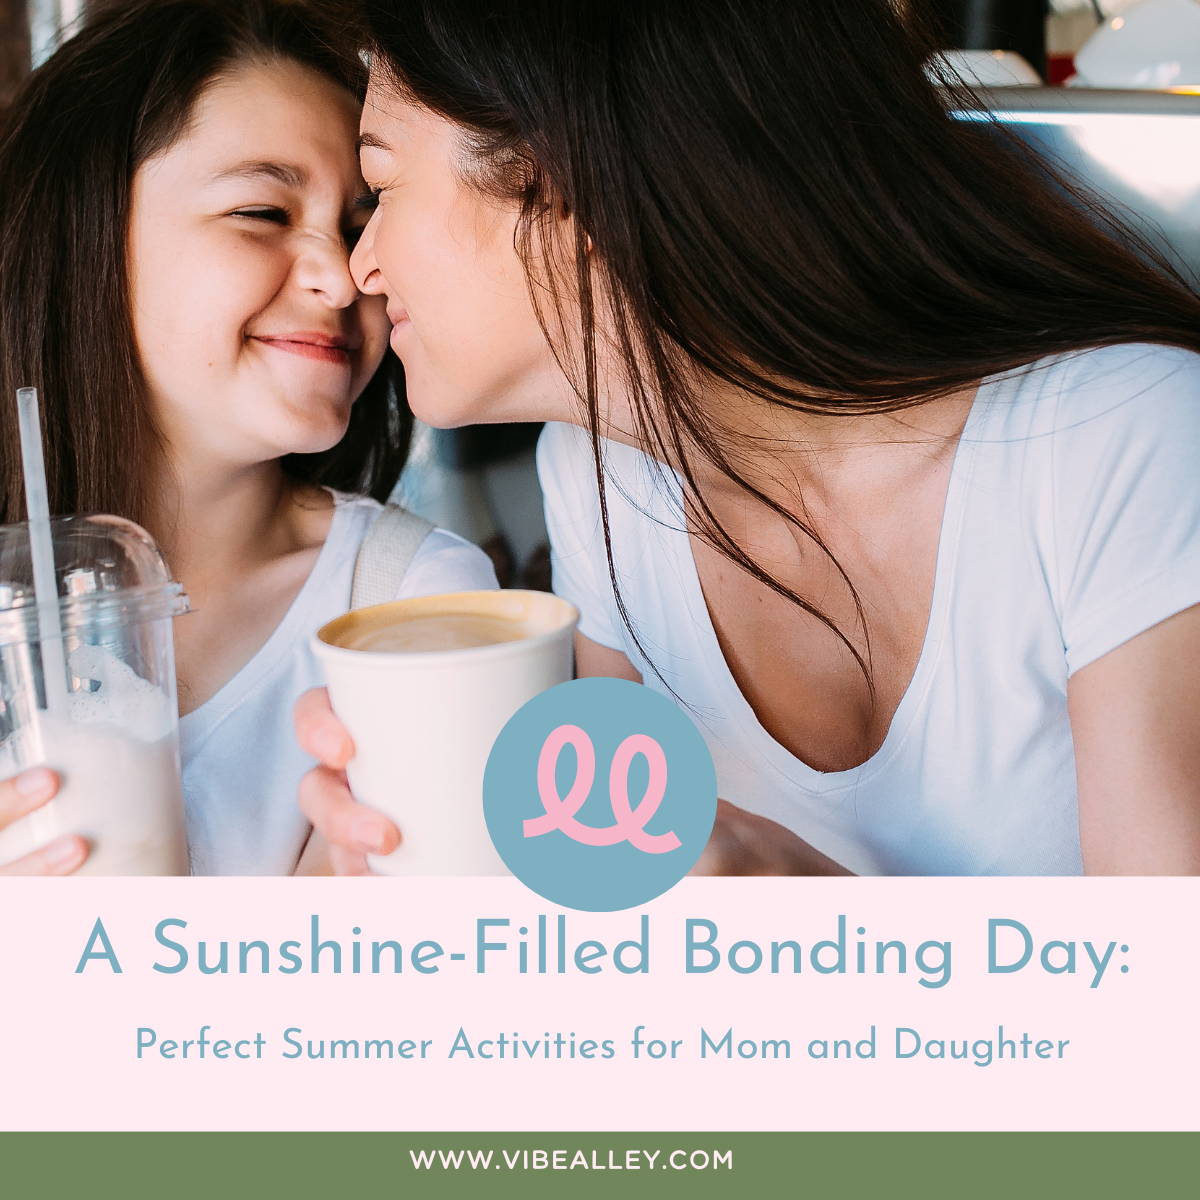 A Sunshine-Filled Bonding Day: Perfect Summer Activities for Mom and Daughter